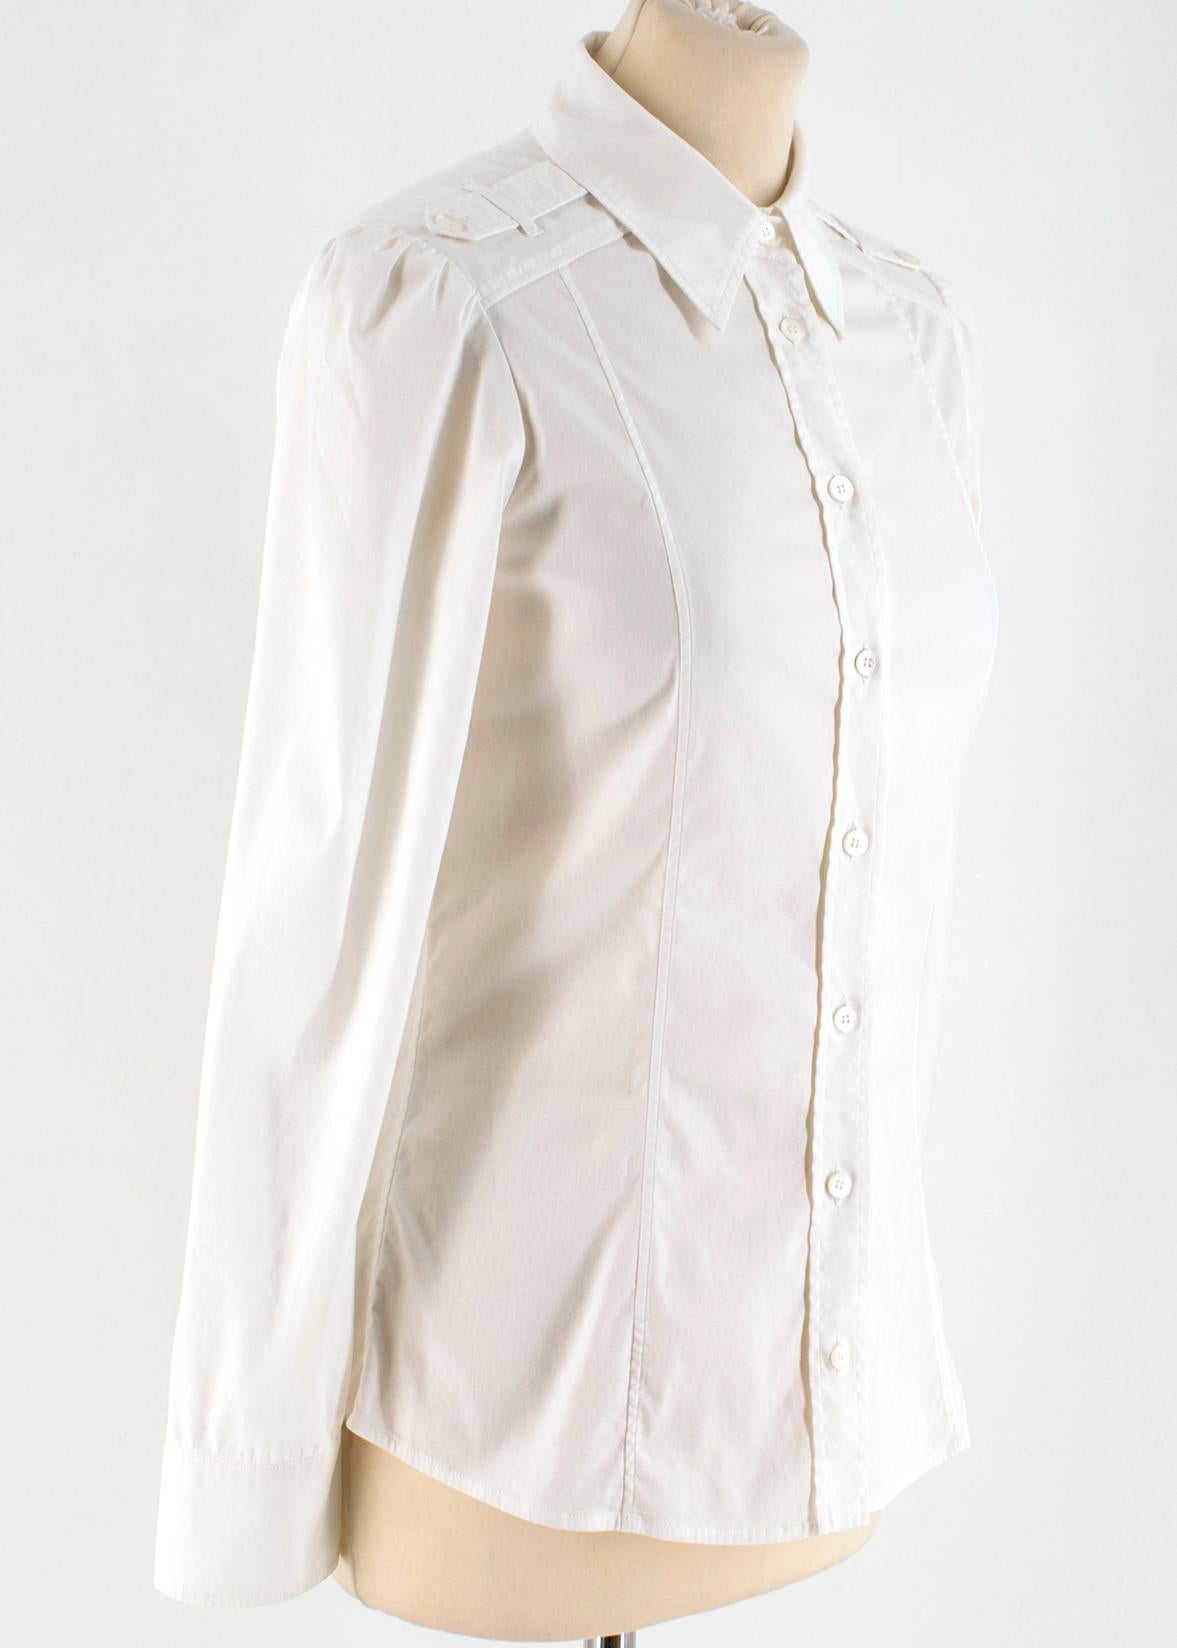 Gucci White Cotton Shirt W/ Epaulettes

- A crisp Cream/White button-down Shirt
- Features a Epaulette (button shoulder piece)
- 100% Cotton
- Made in Italy
- Point Collar
- Two thin line on either side of the shirt (front and back)

Please note,